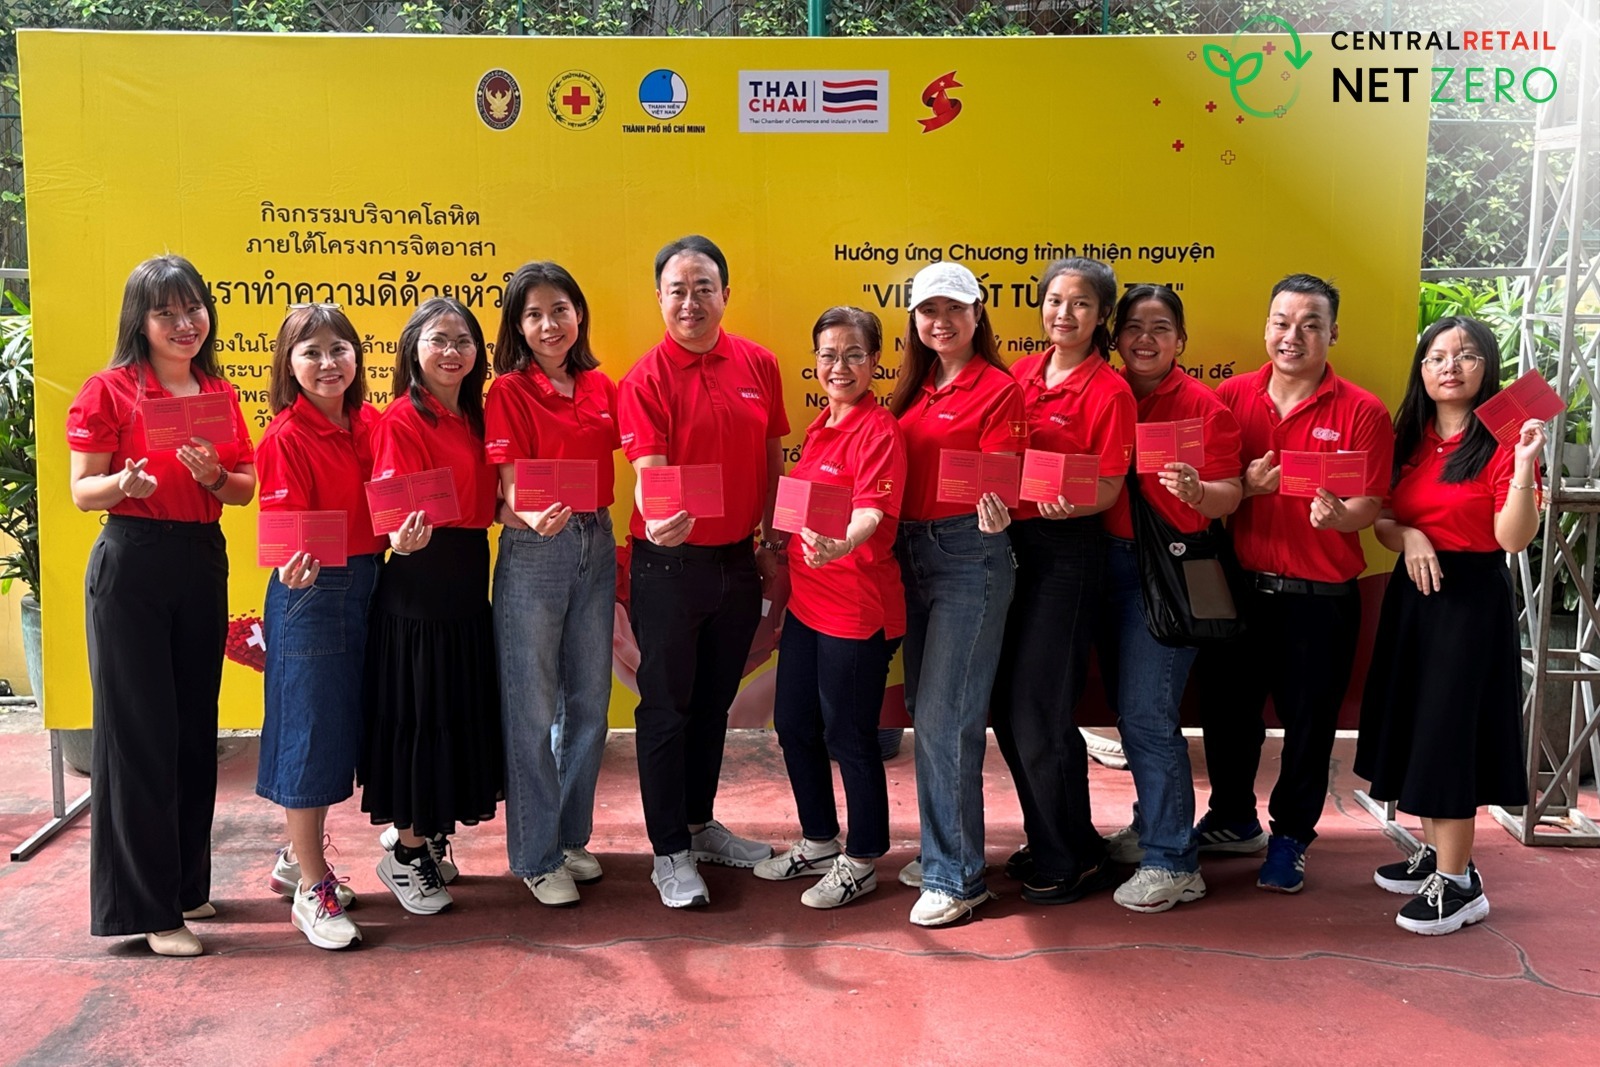 Central Retail Vietnam participates in a blood donation drive on the auspicious occasion of the birthday anniversary of His Majesty King Bhumibol Adulyadej The Great